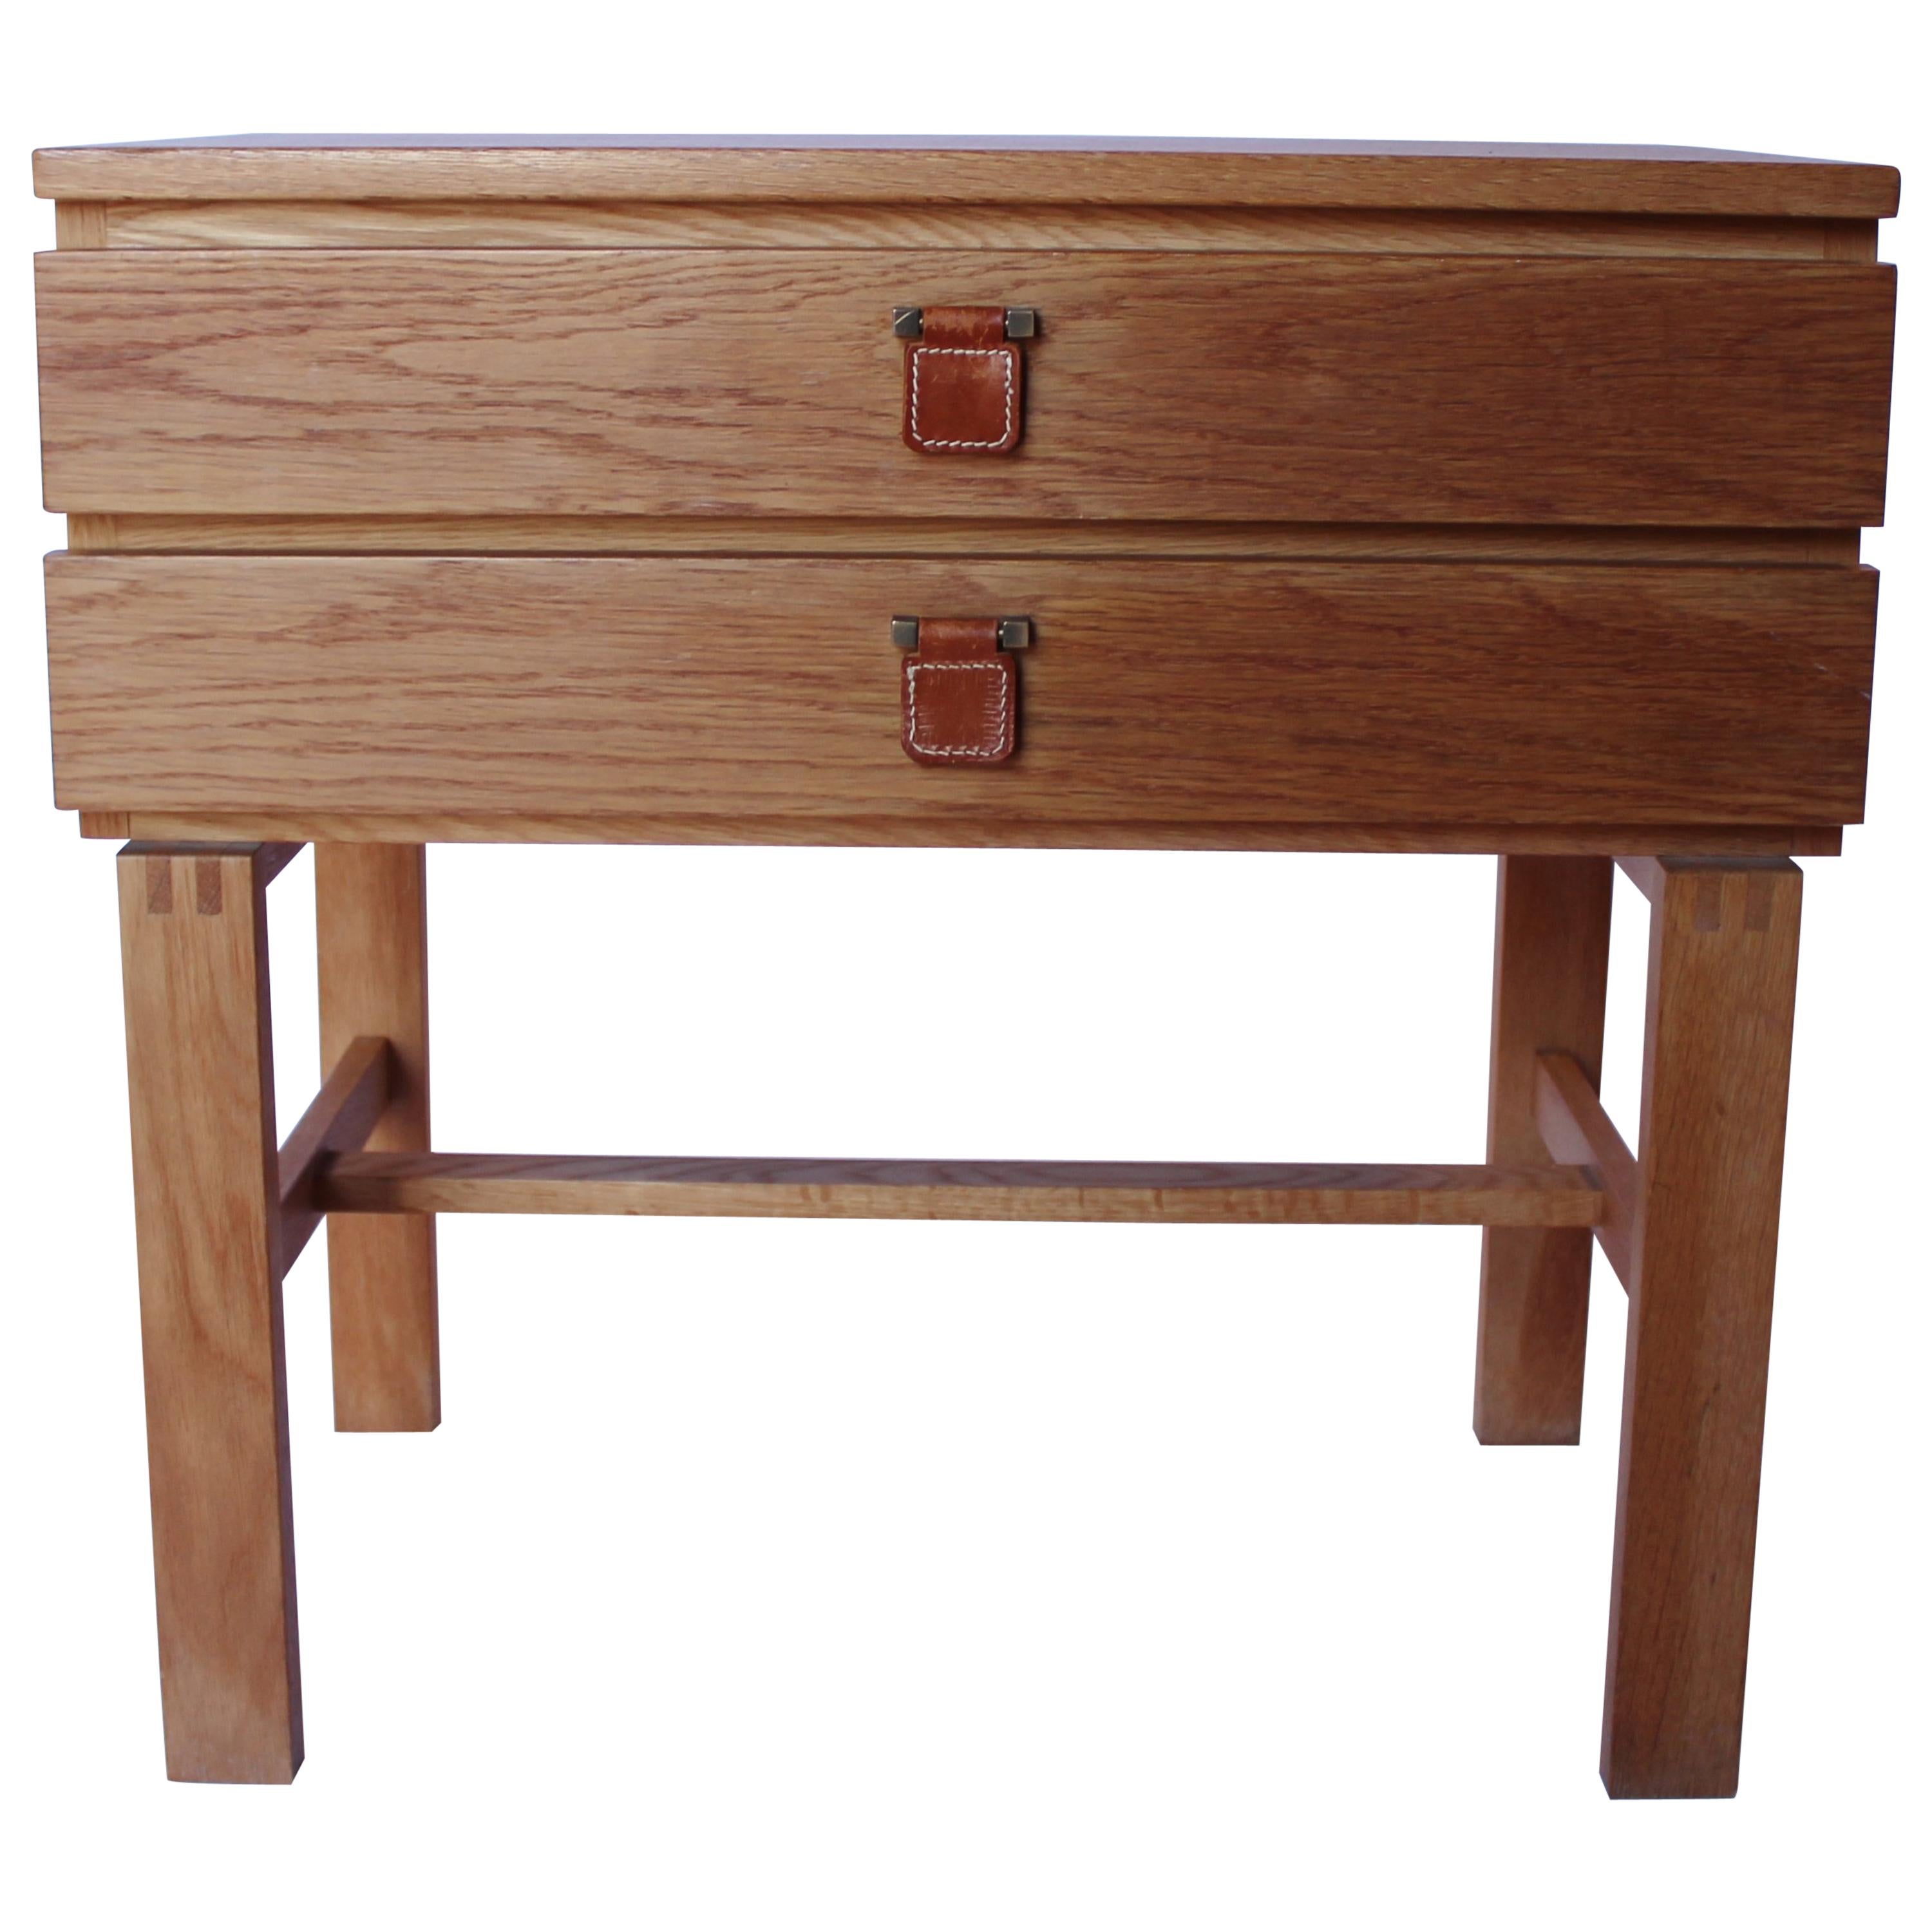 Small Oak Chest of Drawers with Leather Handles by Fröseke Nybrofabrik, 1960s